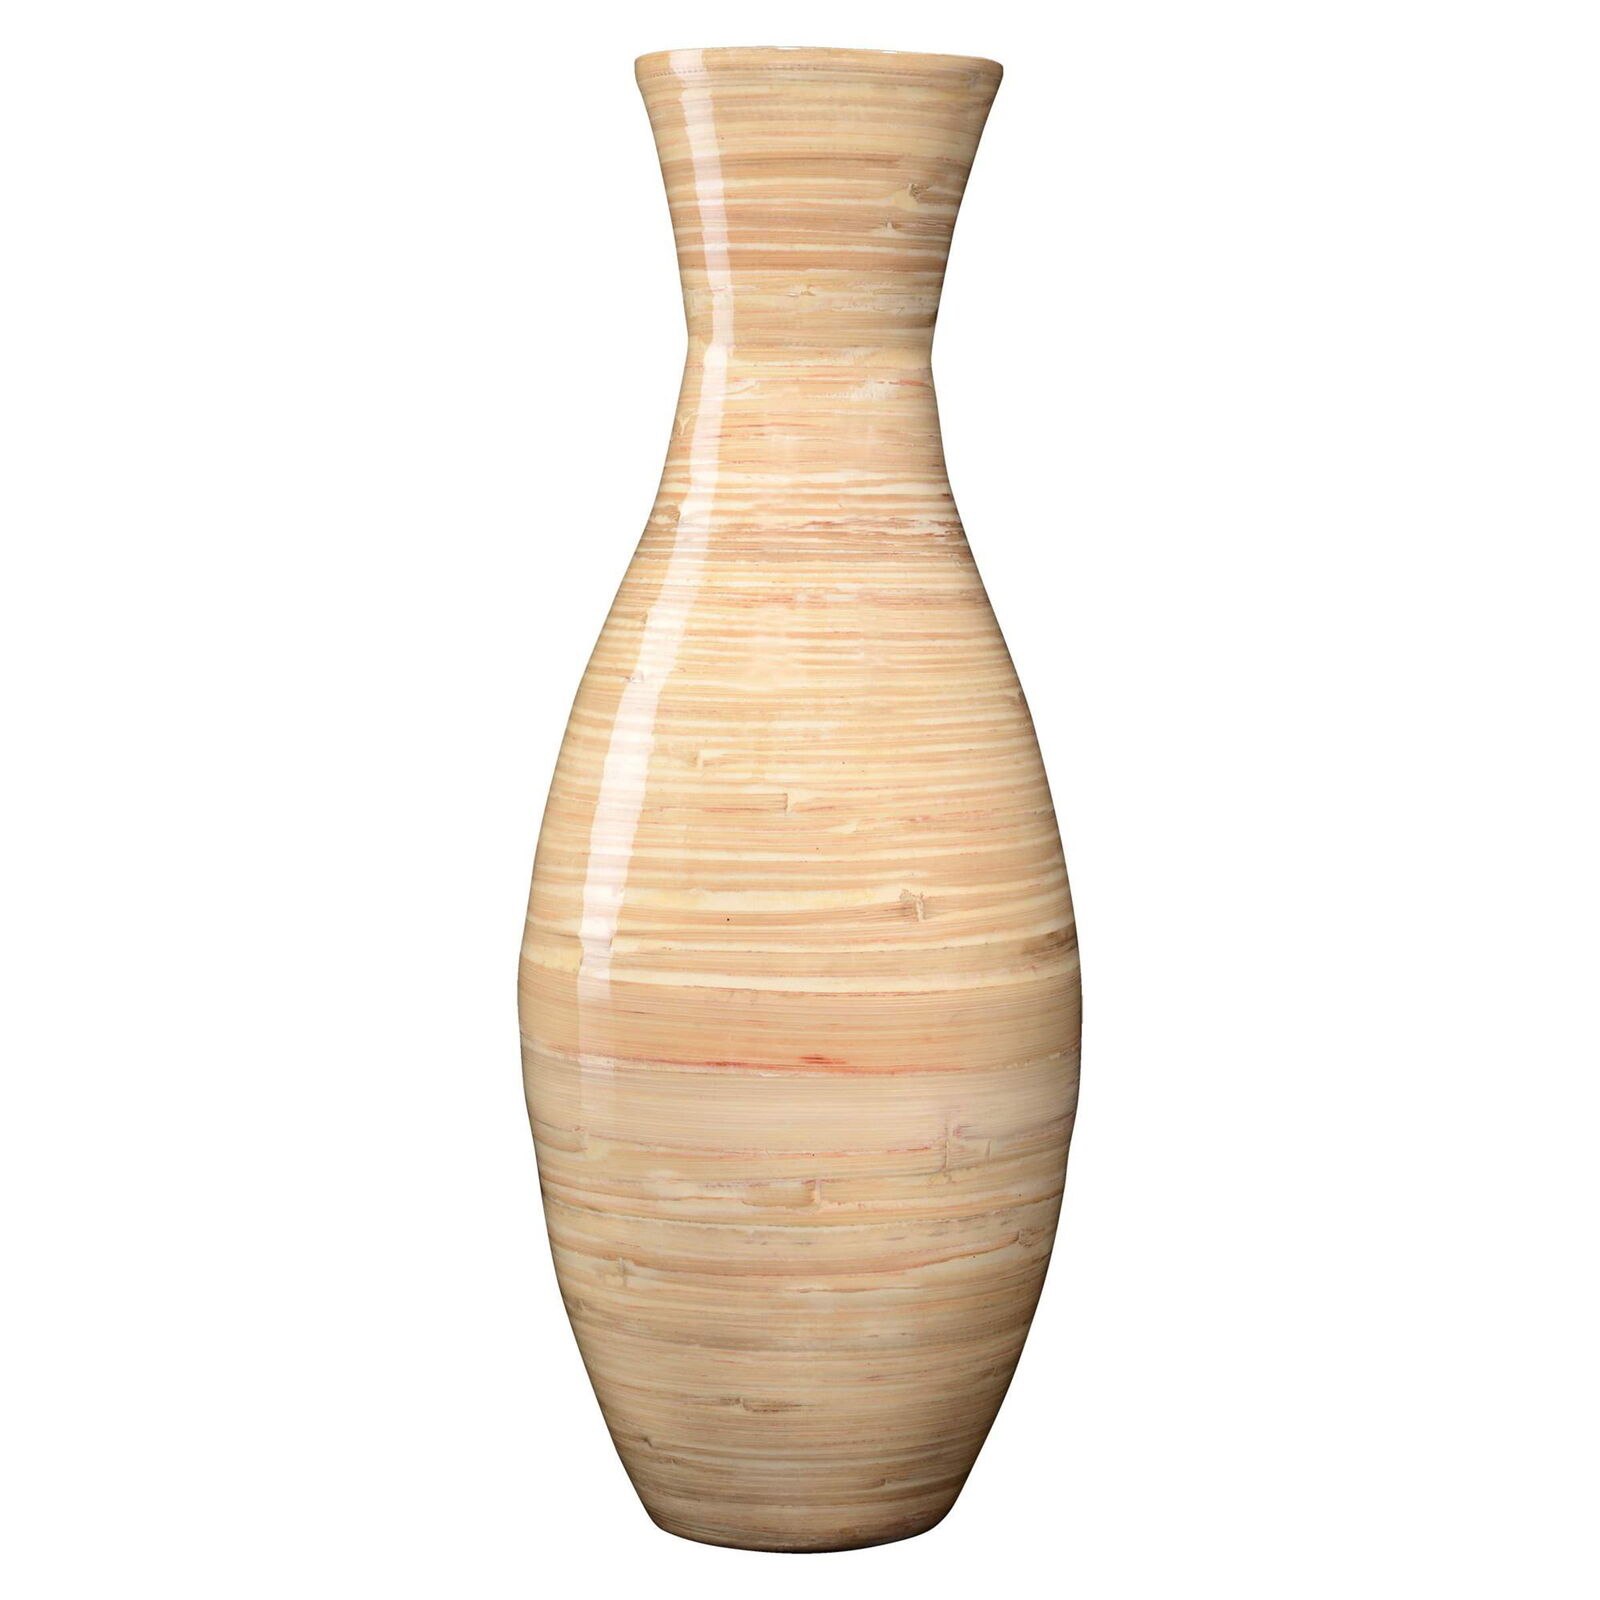 Villacera Handcrafted 20-Inch-Tall Sustainable Bamboo Floor Vase